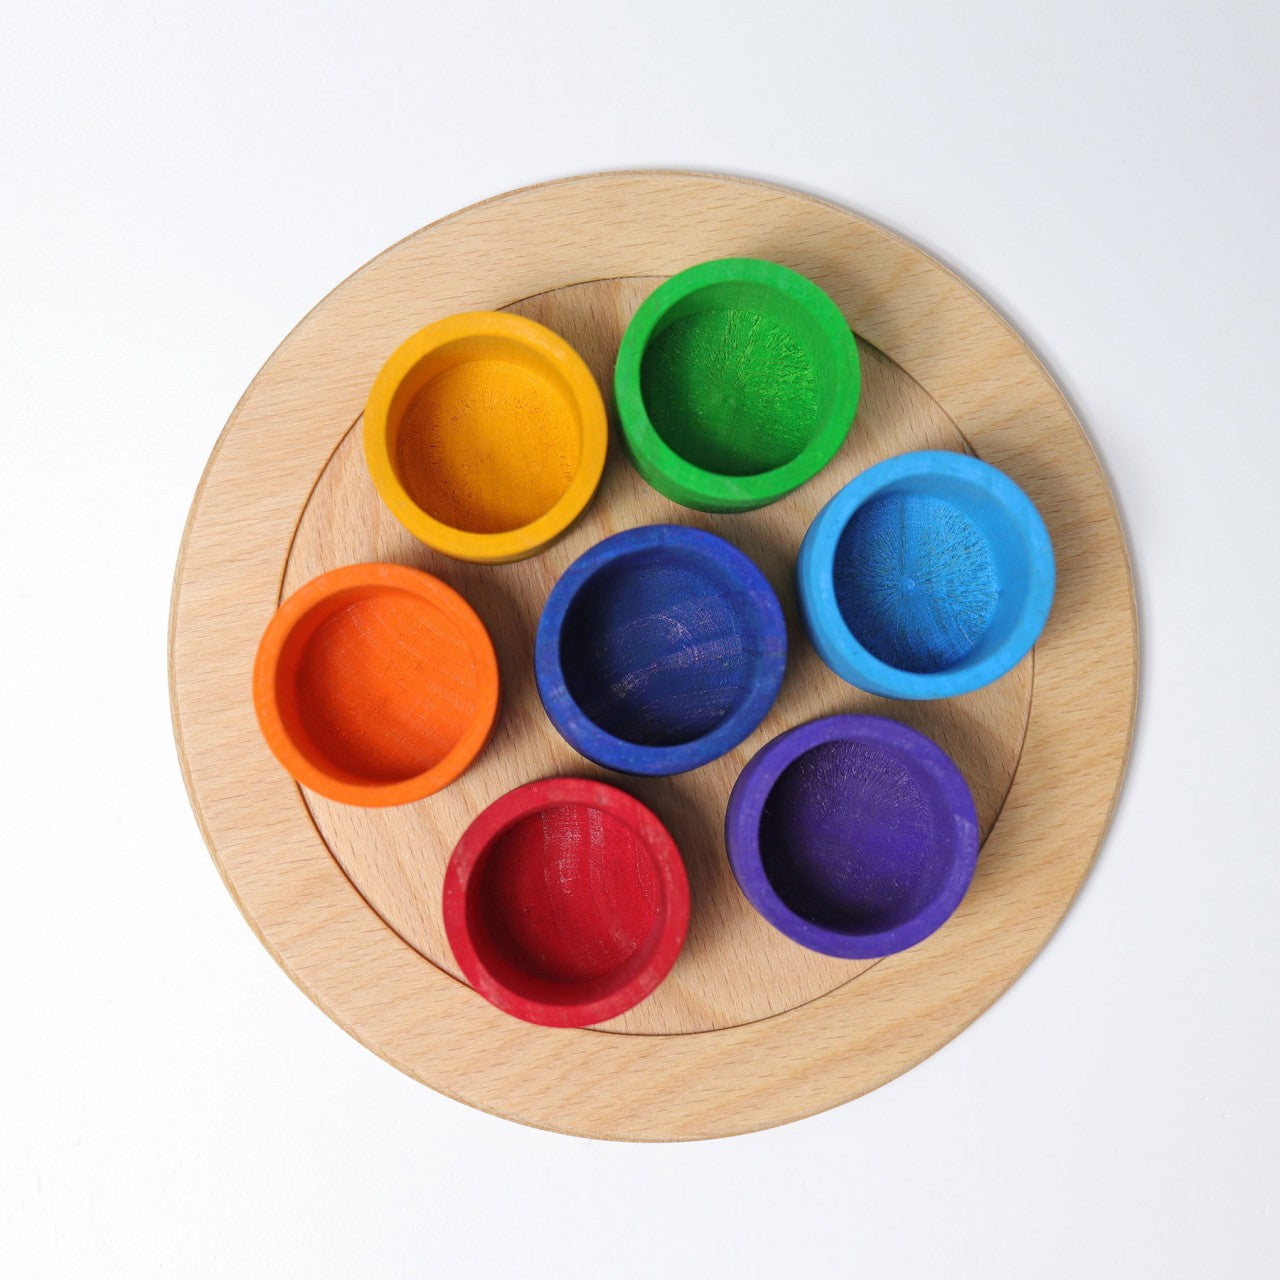 7 Rainbow Friends In Bowls | Wooden Toy Figures | Open-Ended Play